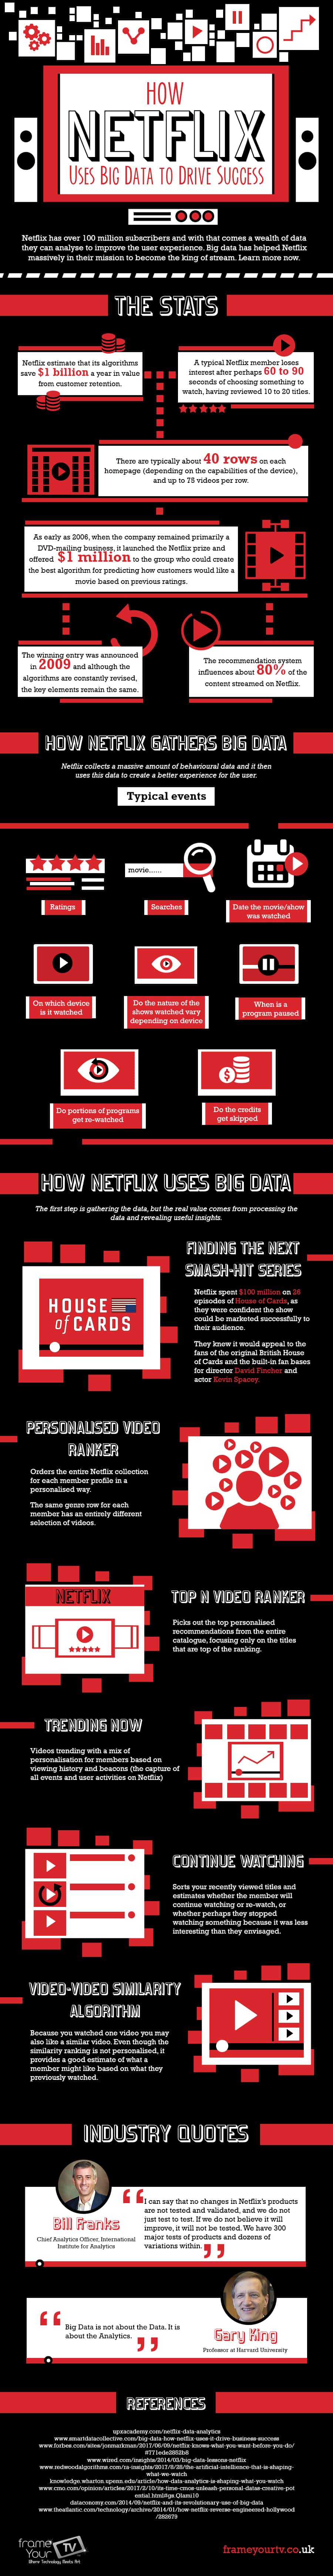 INFOGRAPHIC: How Netflix Uses Big Data to Drive Success